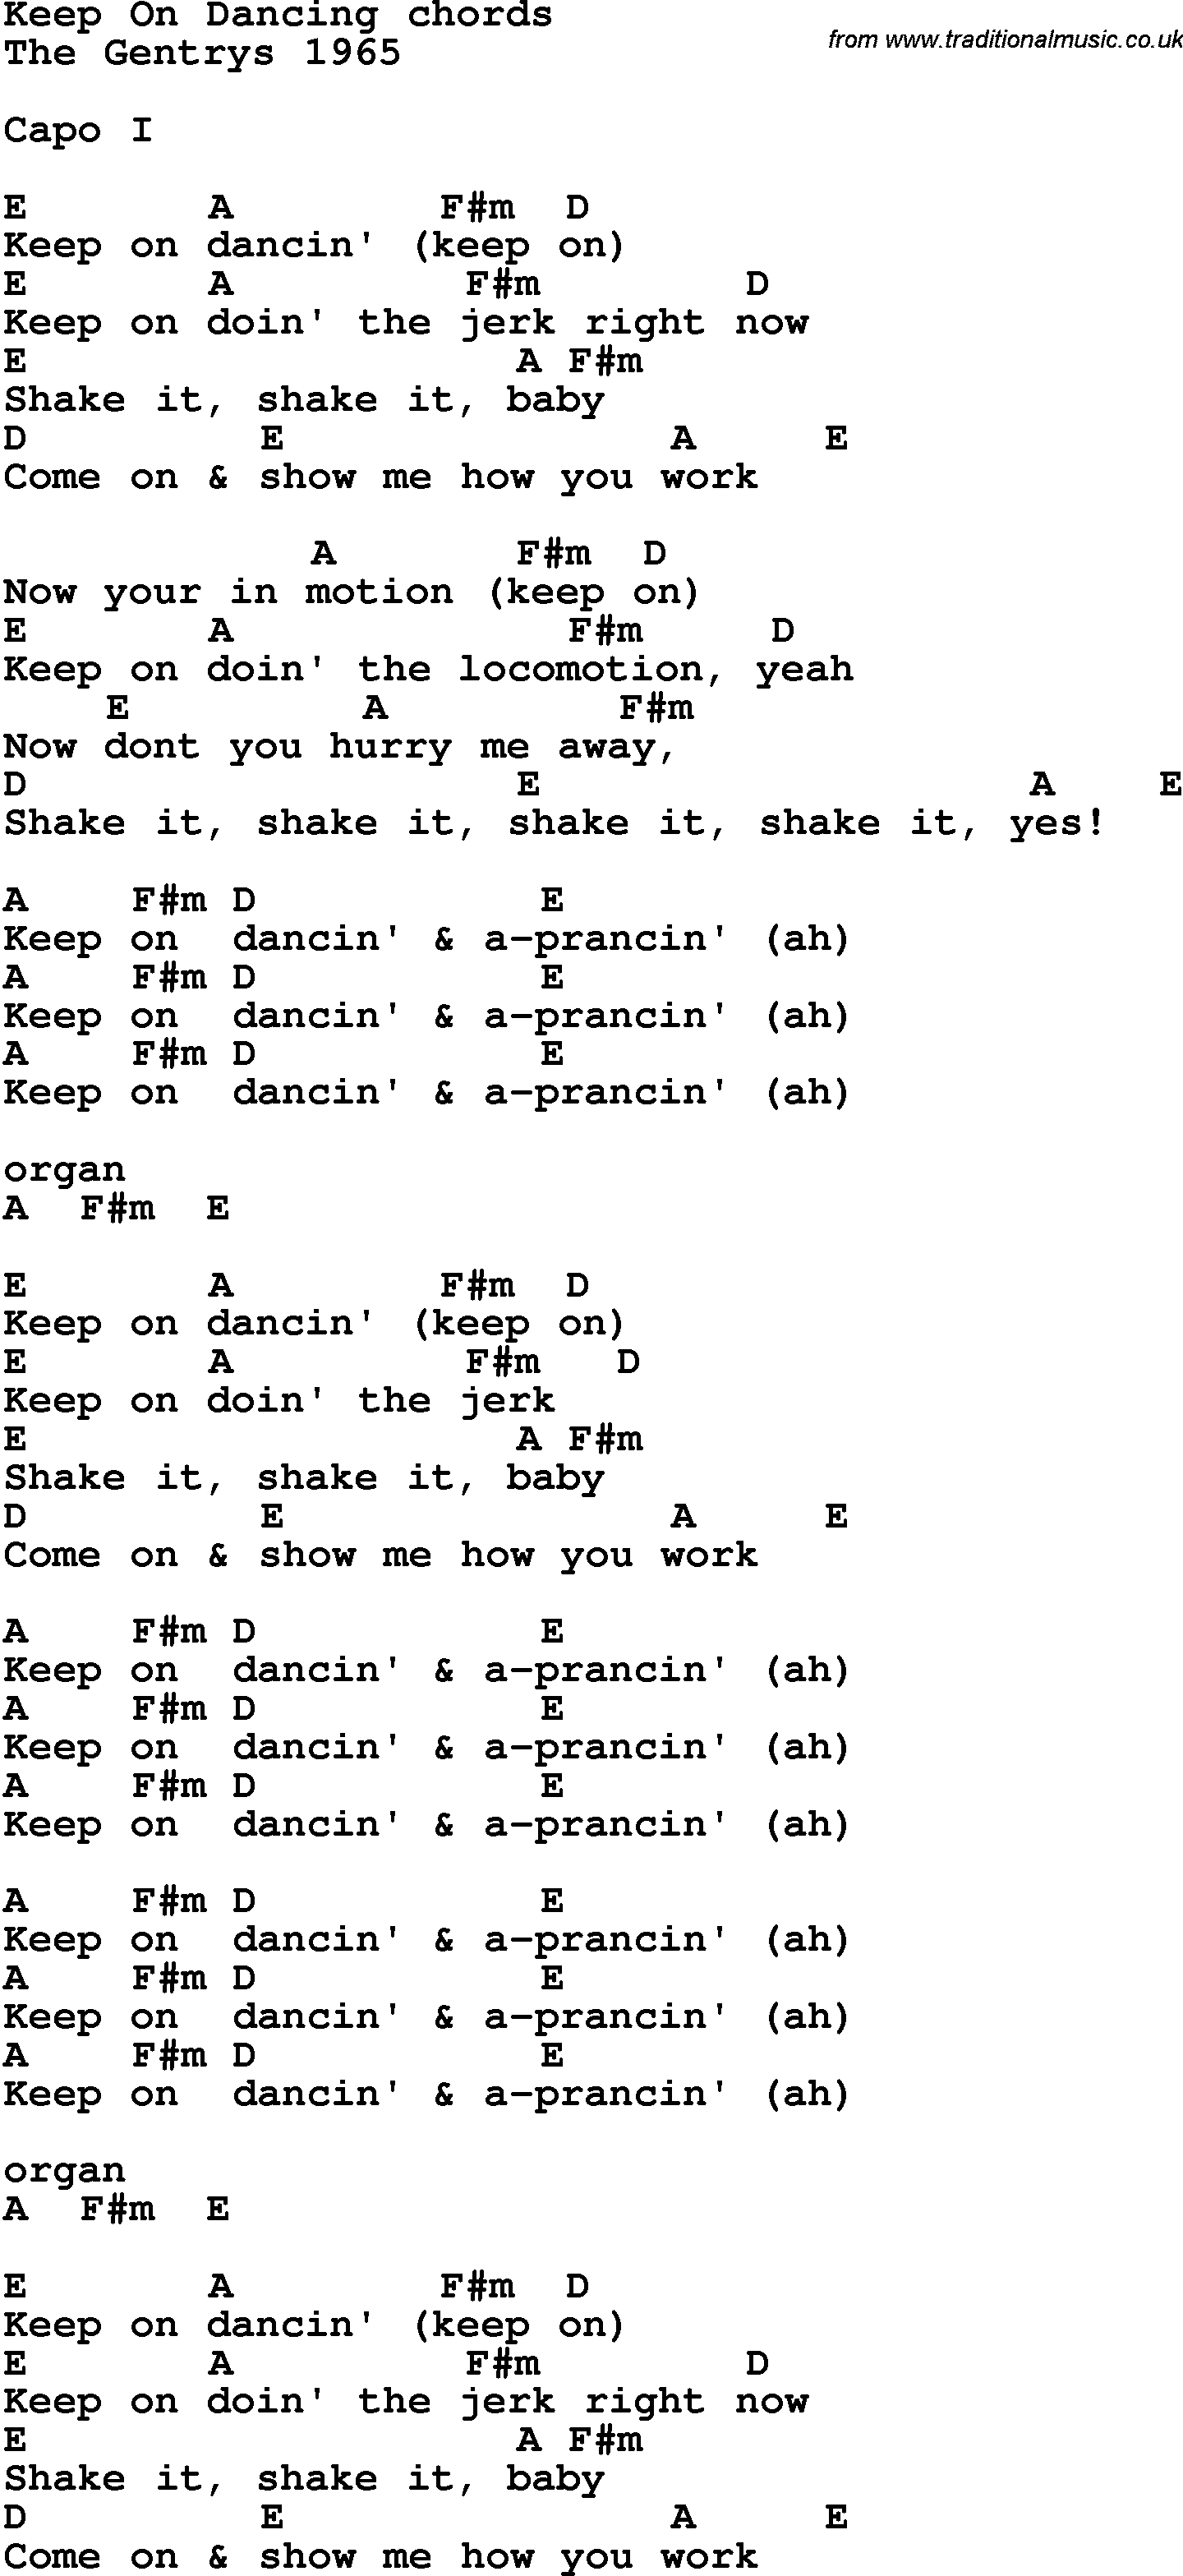 lyrics with guitar chords for Keep On Dancing